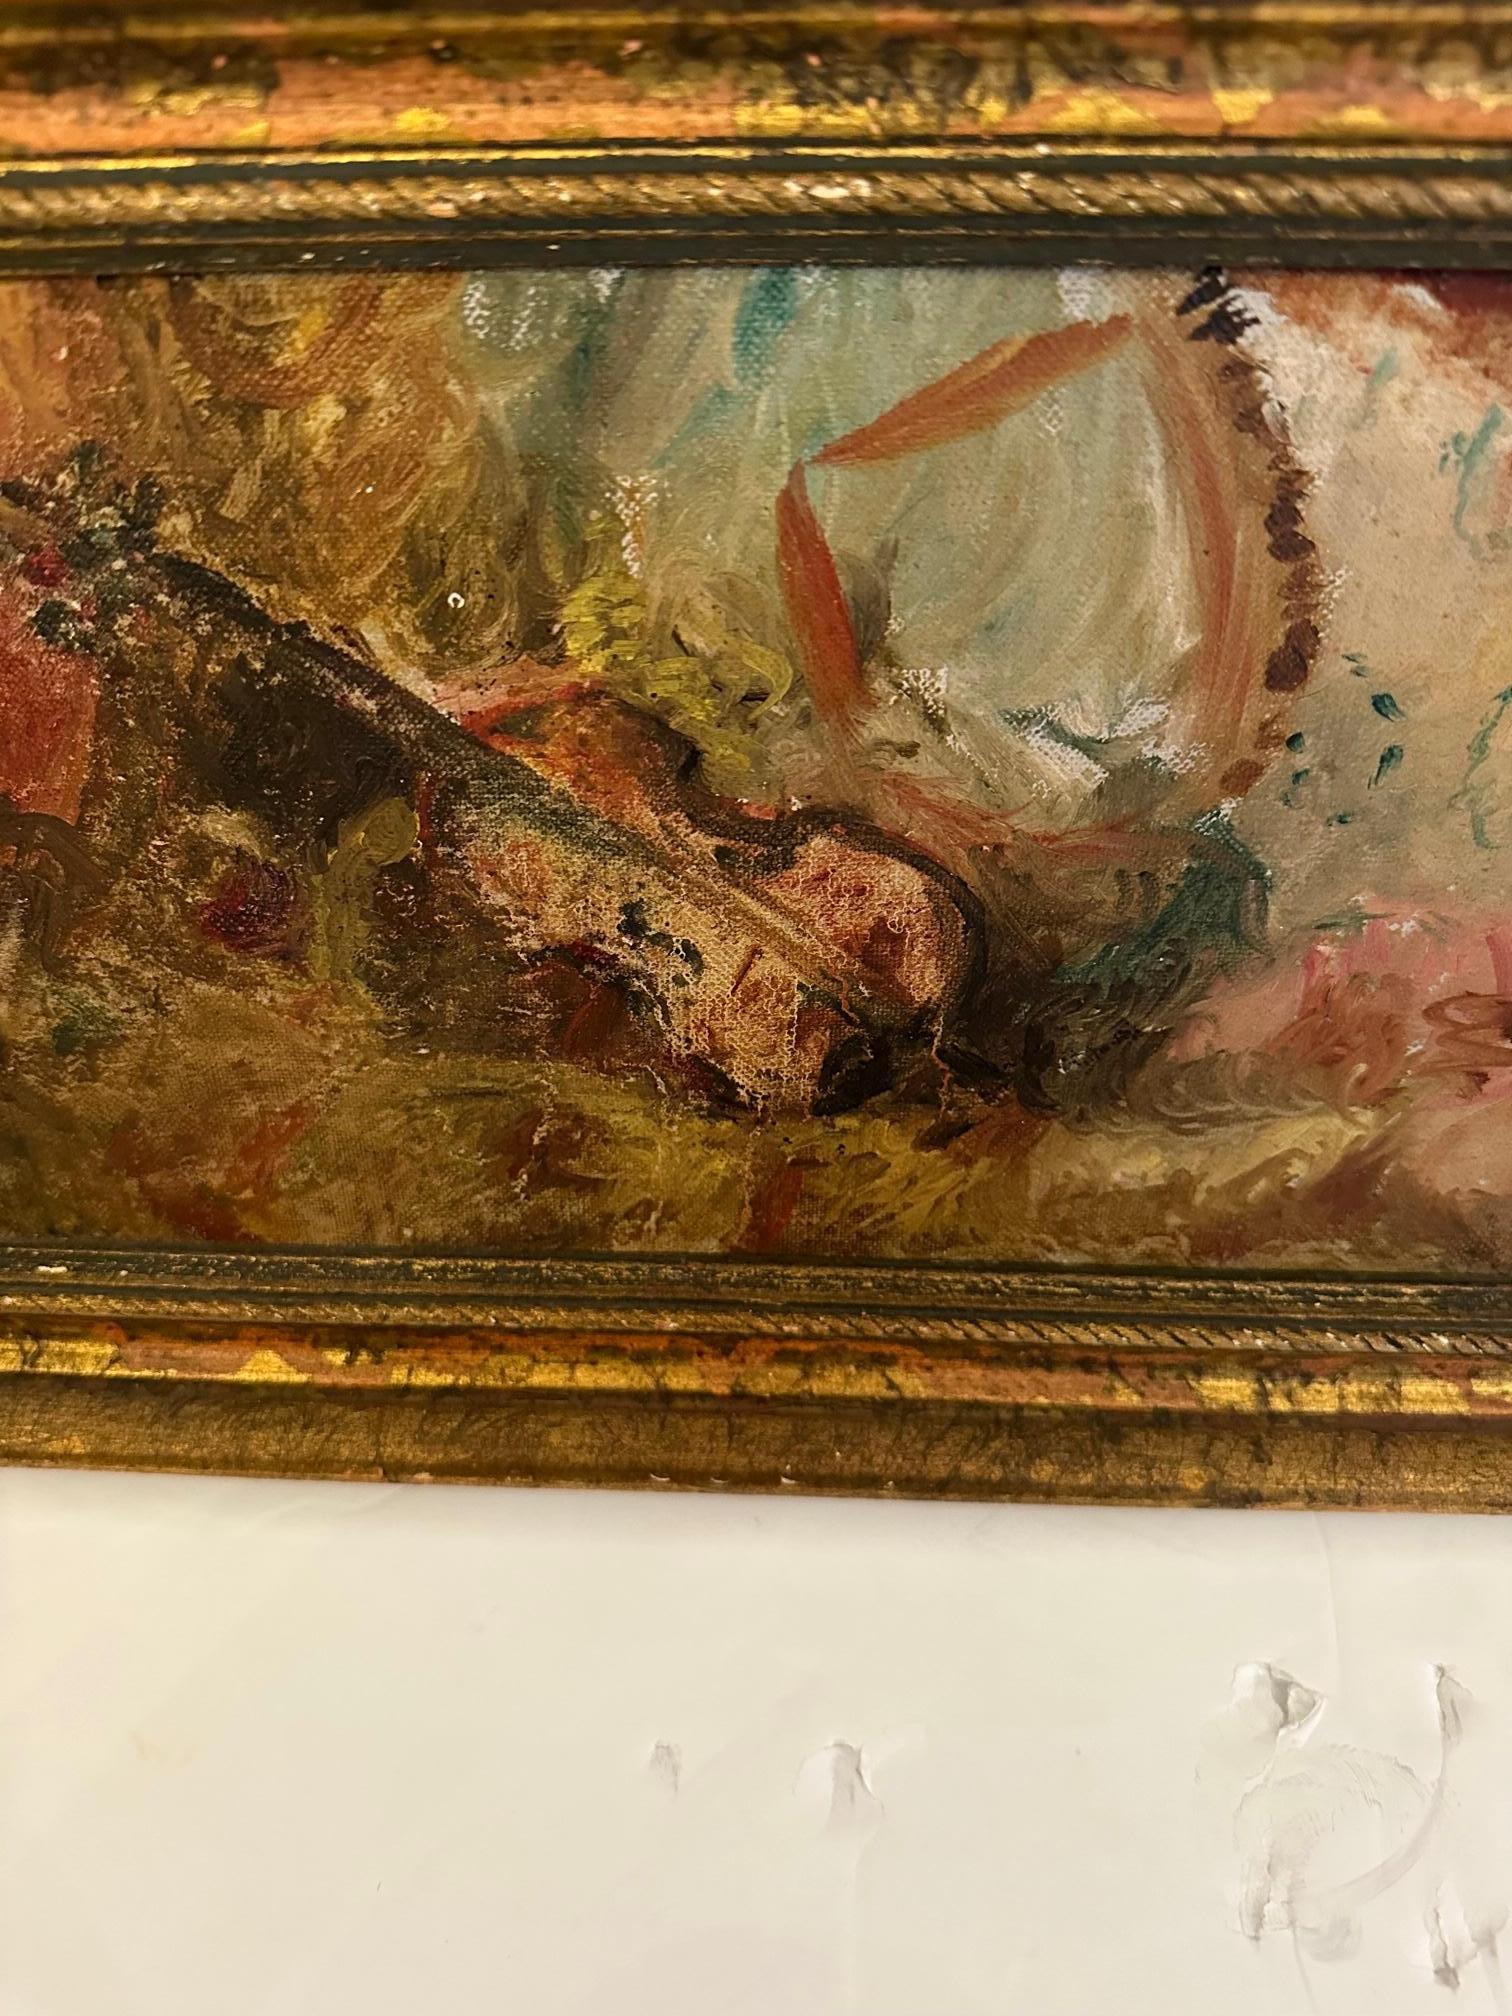 A shimmering jewel like antique oil painting of small size but powerful effect with still life composition of a violin in an amorphous setting.  Gorgeous unexpected colors including pinks.  Pretty giltwood frame.  No signature.